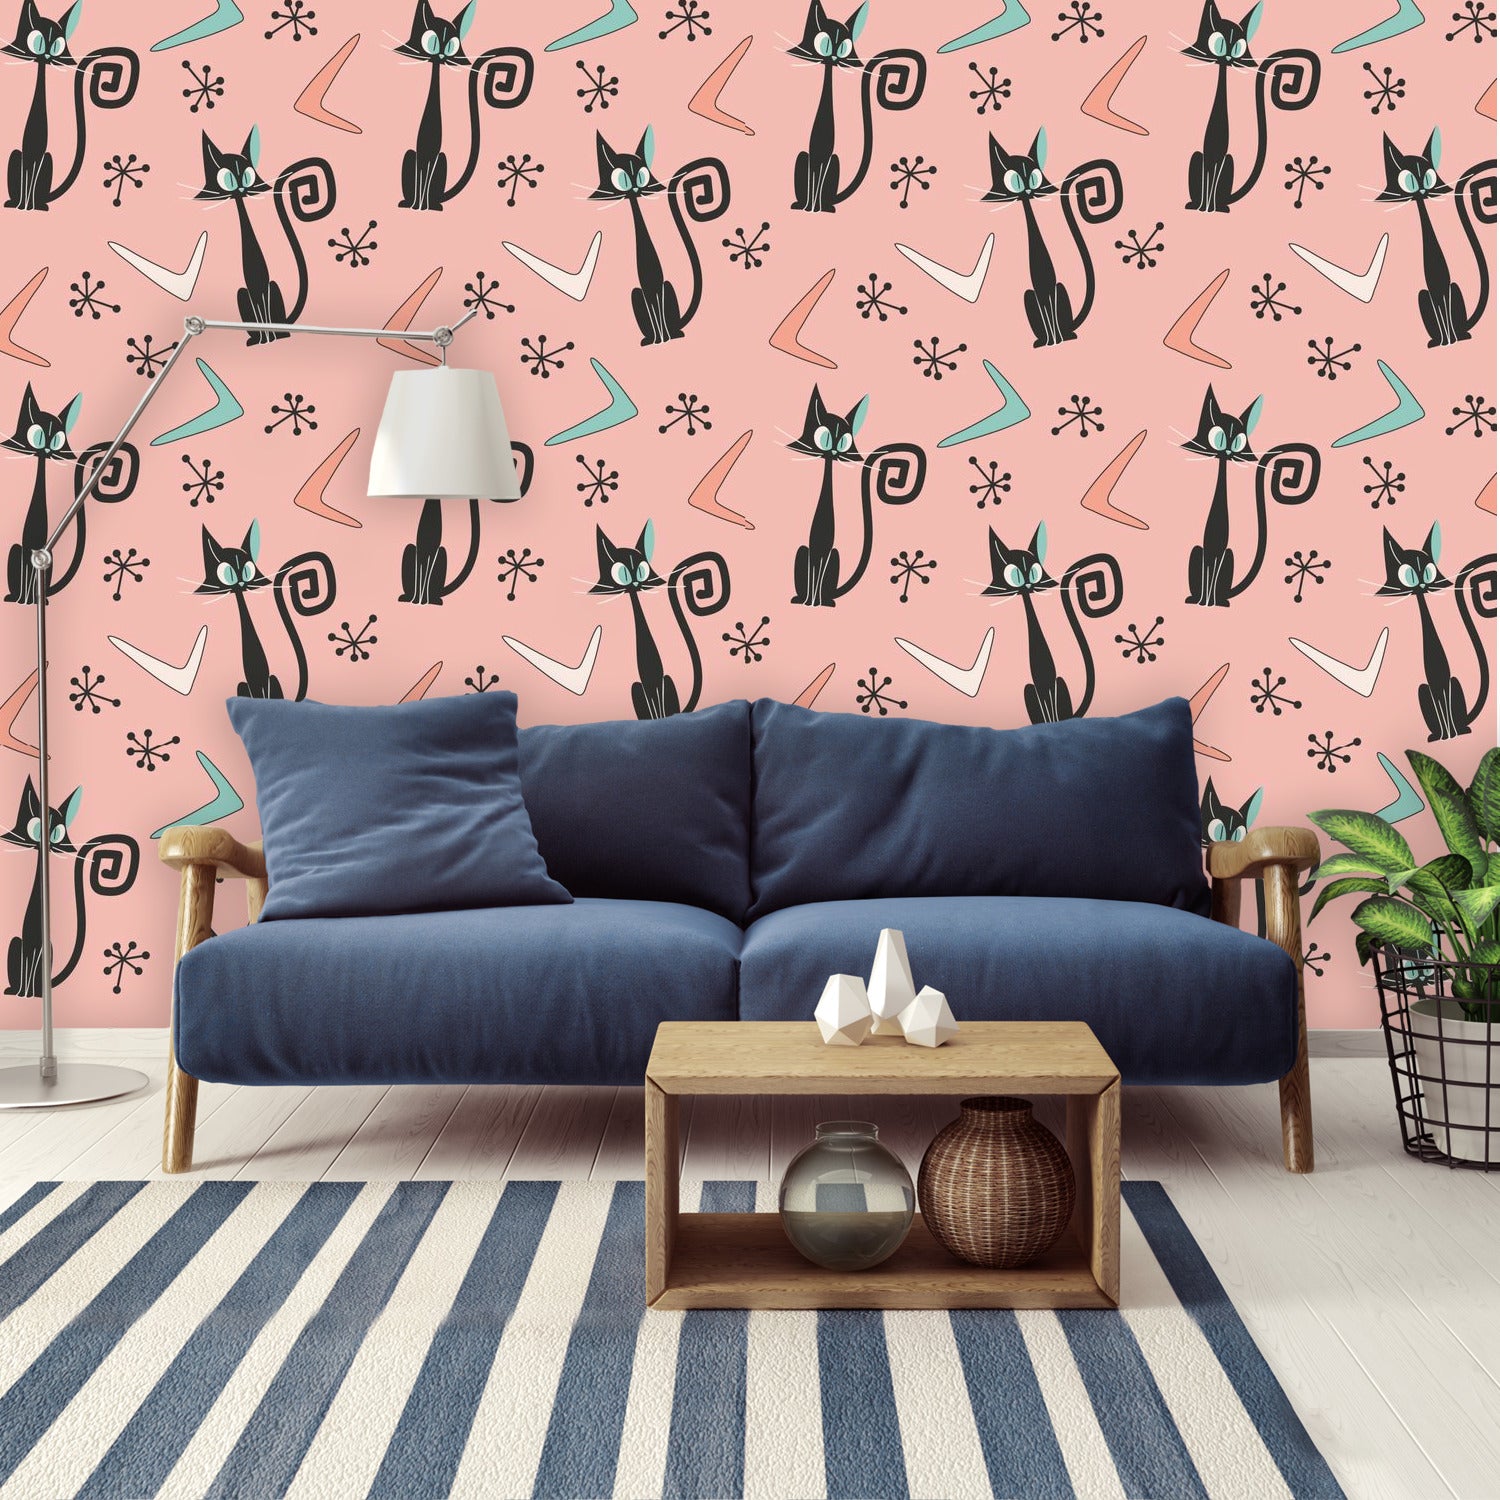 Atomic Cat Pink Retro Removeable Wall Paper, Peel And Stick Mid Century Modern Wall Murals